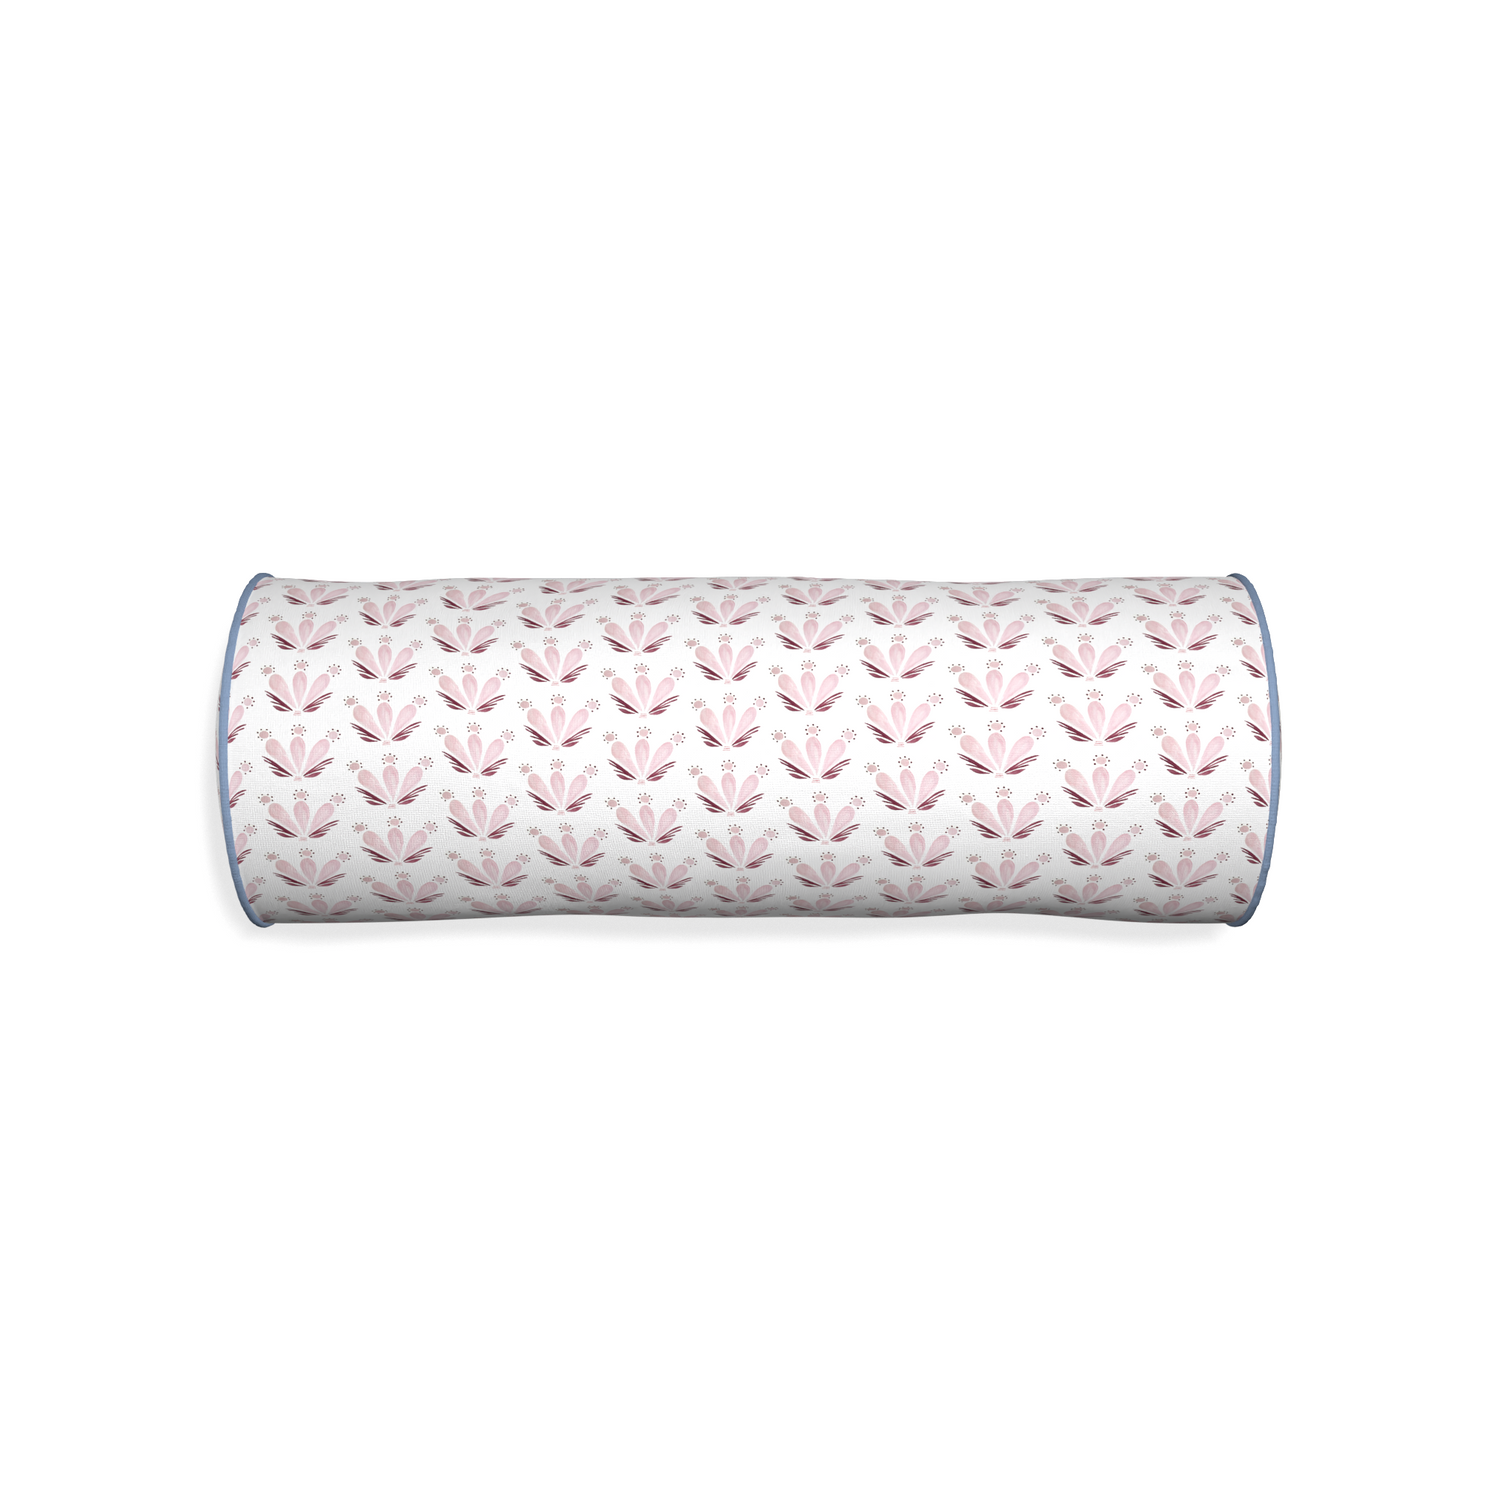 Bolster serena pink custom pink & burgundy drop repeat floralpillow with sky piping on white background